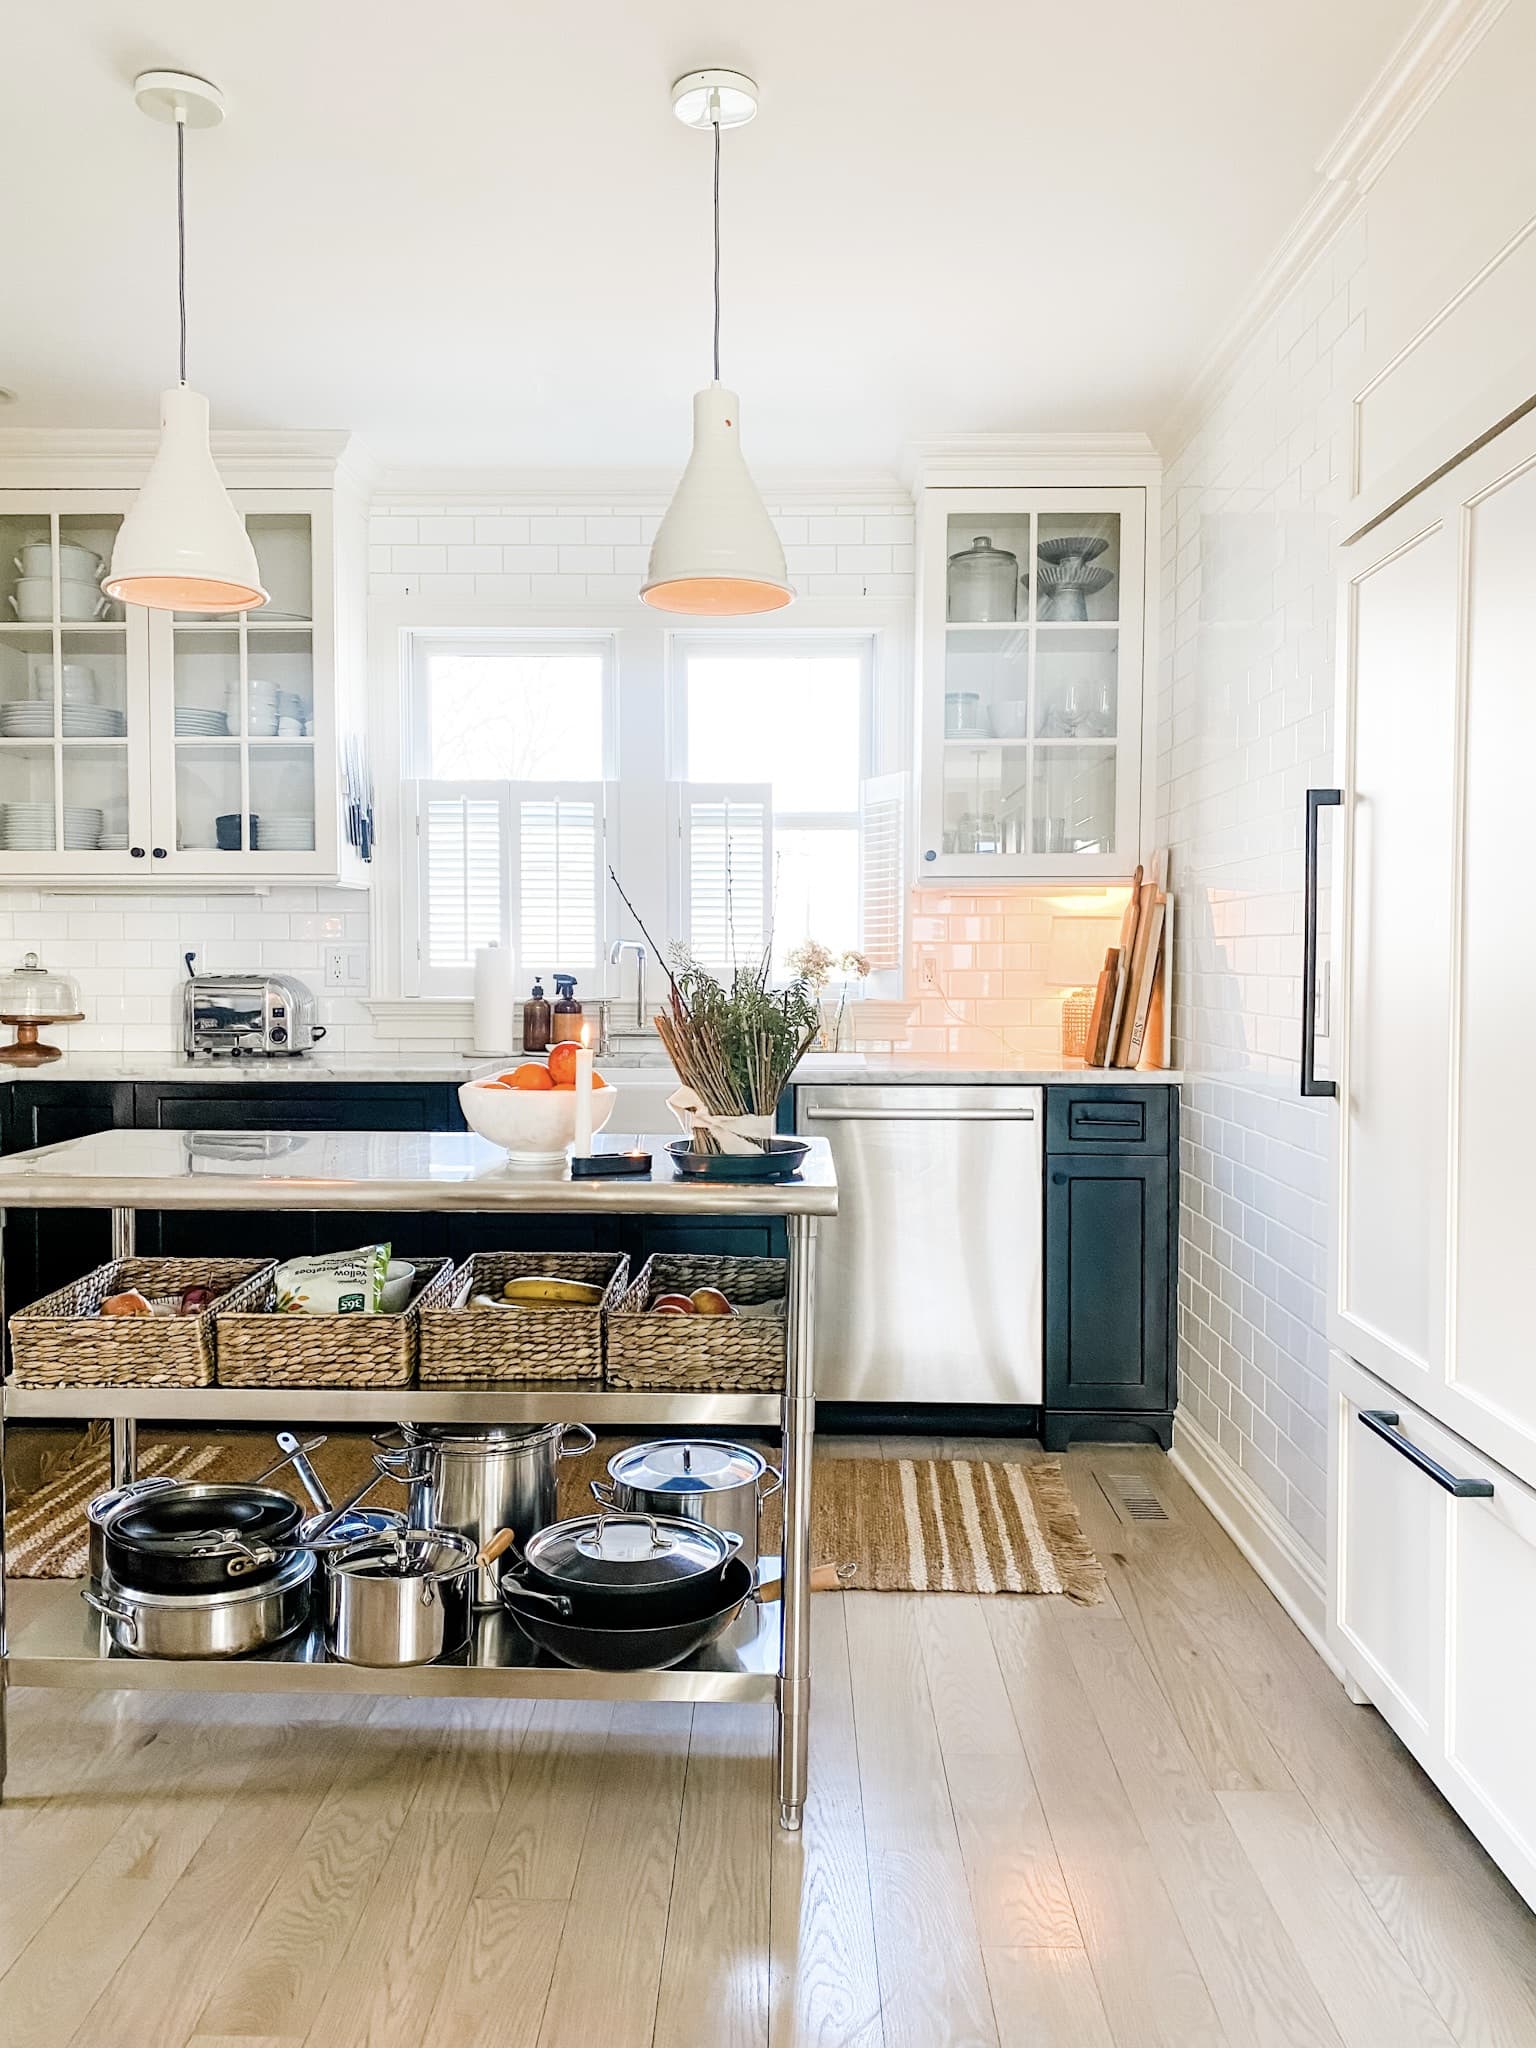 black and white kitchen with oranges in white bowl on island with ceramic pendant lights